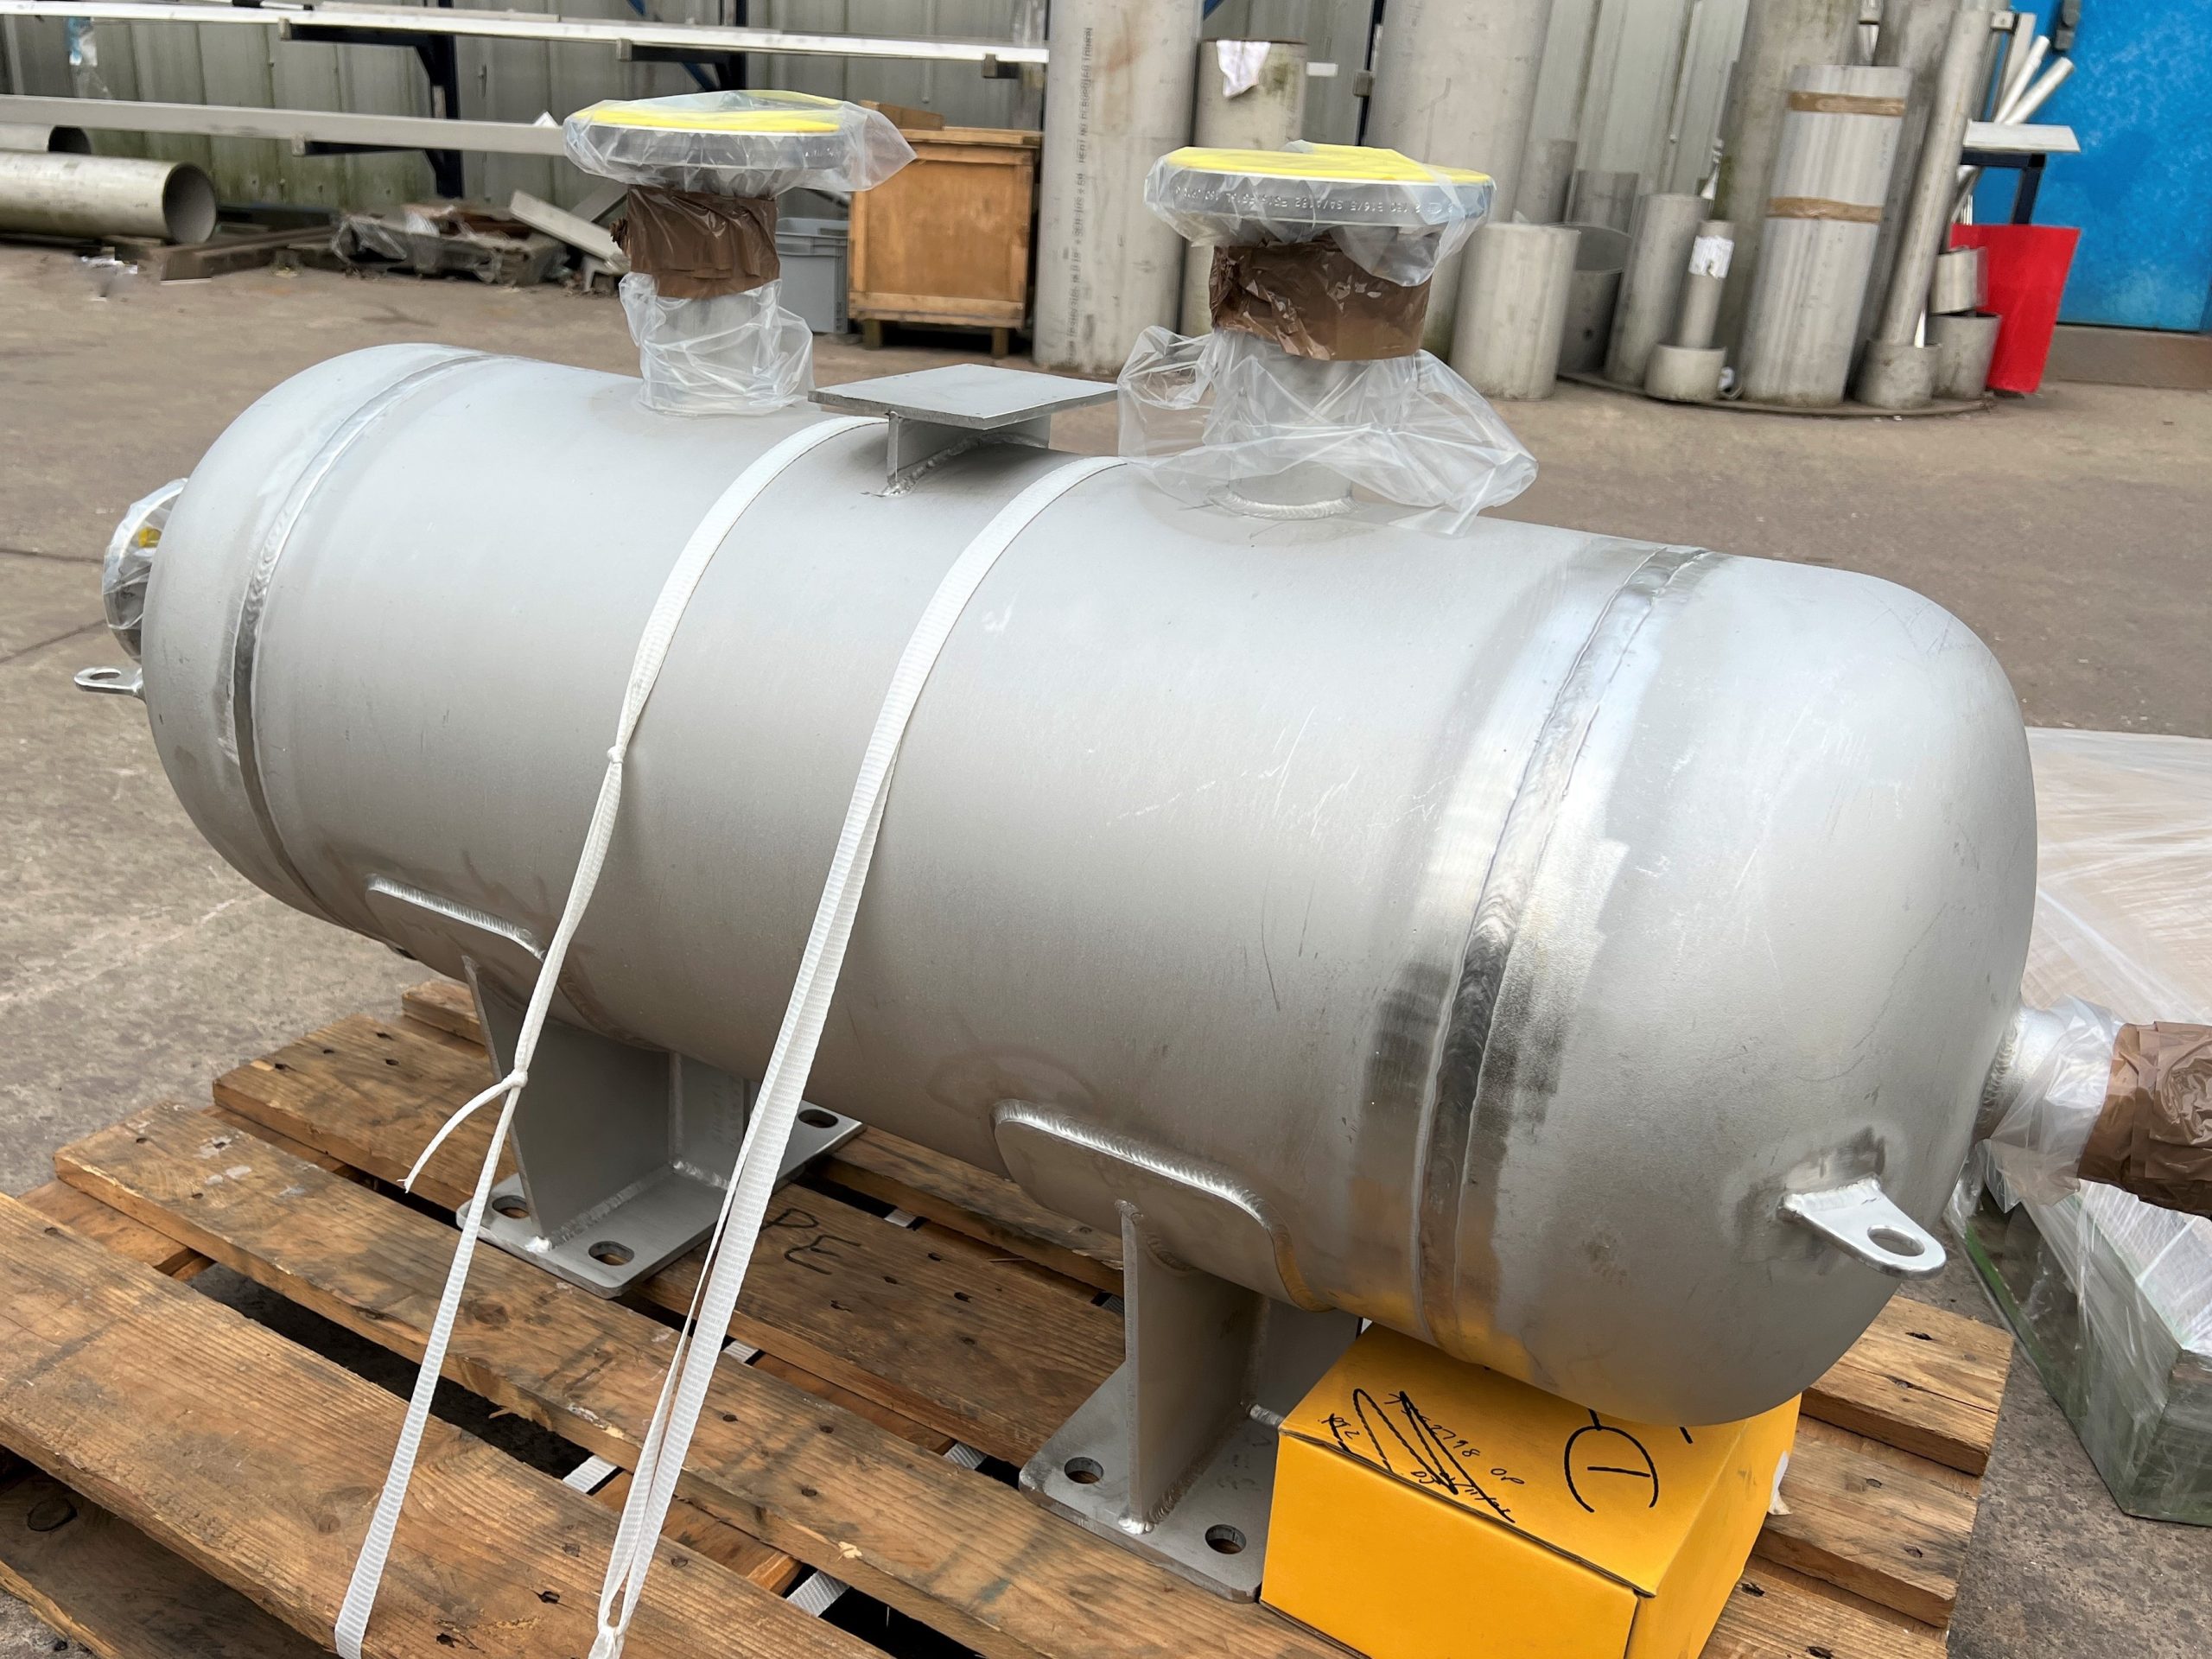 ASME U Air Receiver made by CPE Pressure Vessels for the Gallaf 3 project